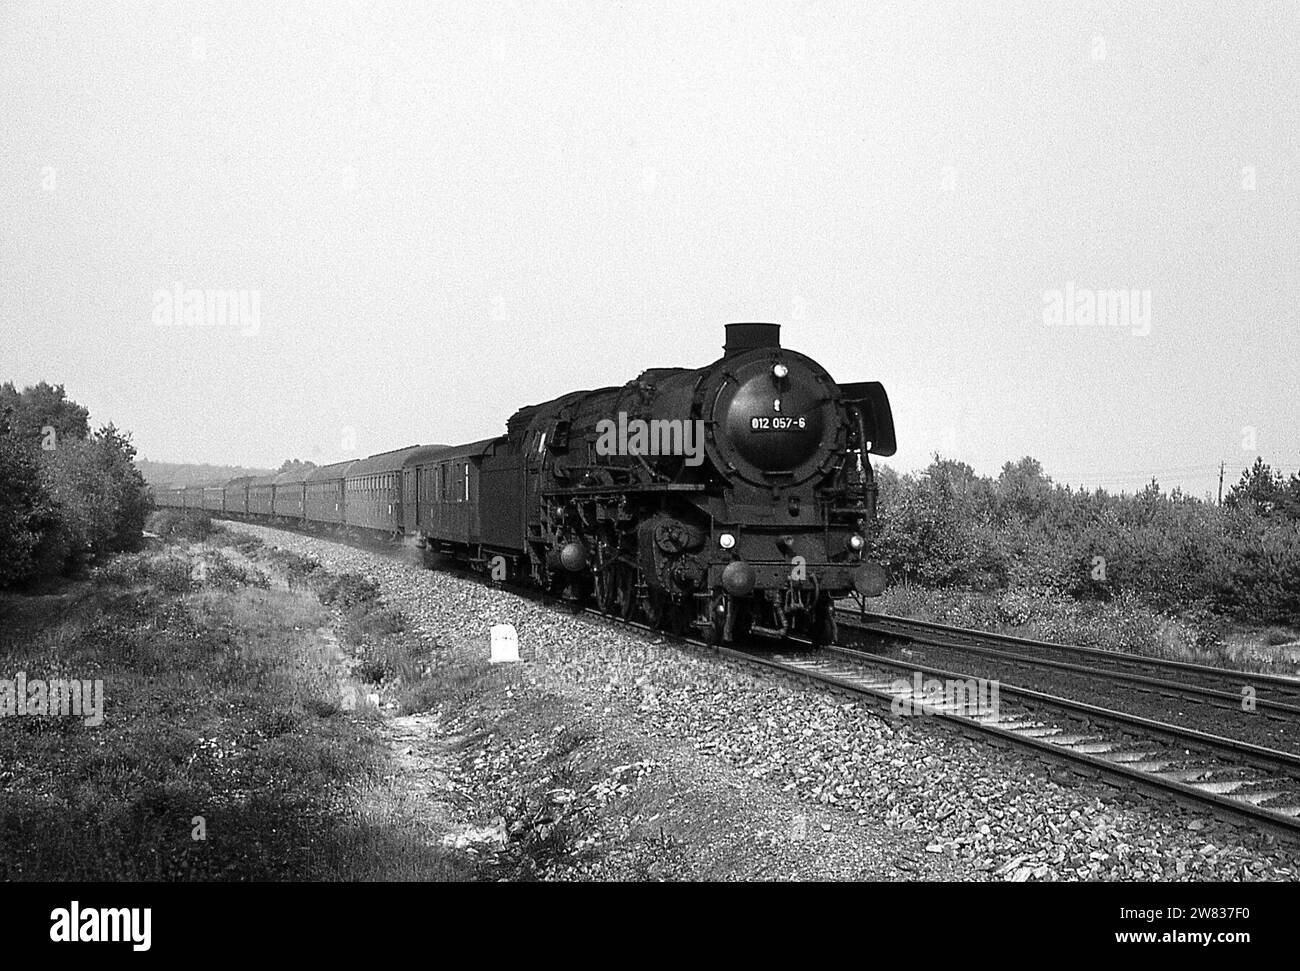 One week in October 1970 in West Germany Photographing Steam Locomotives Stock Photo